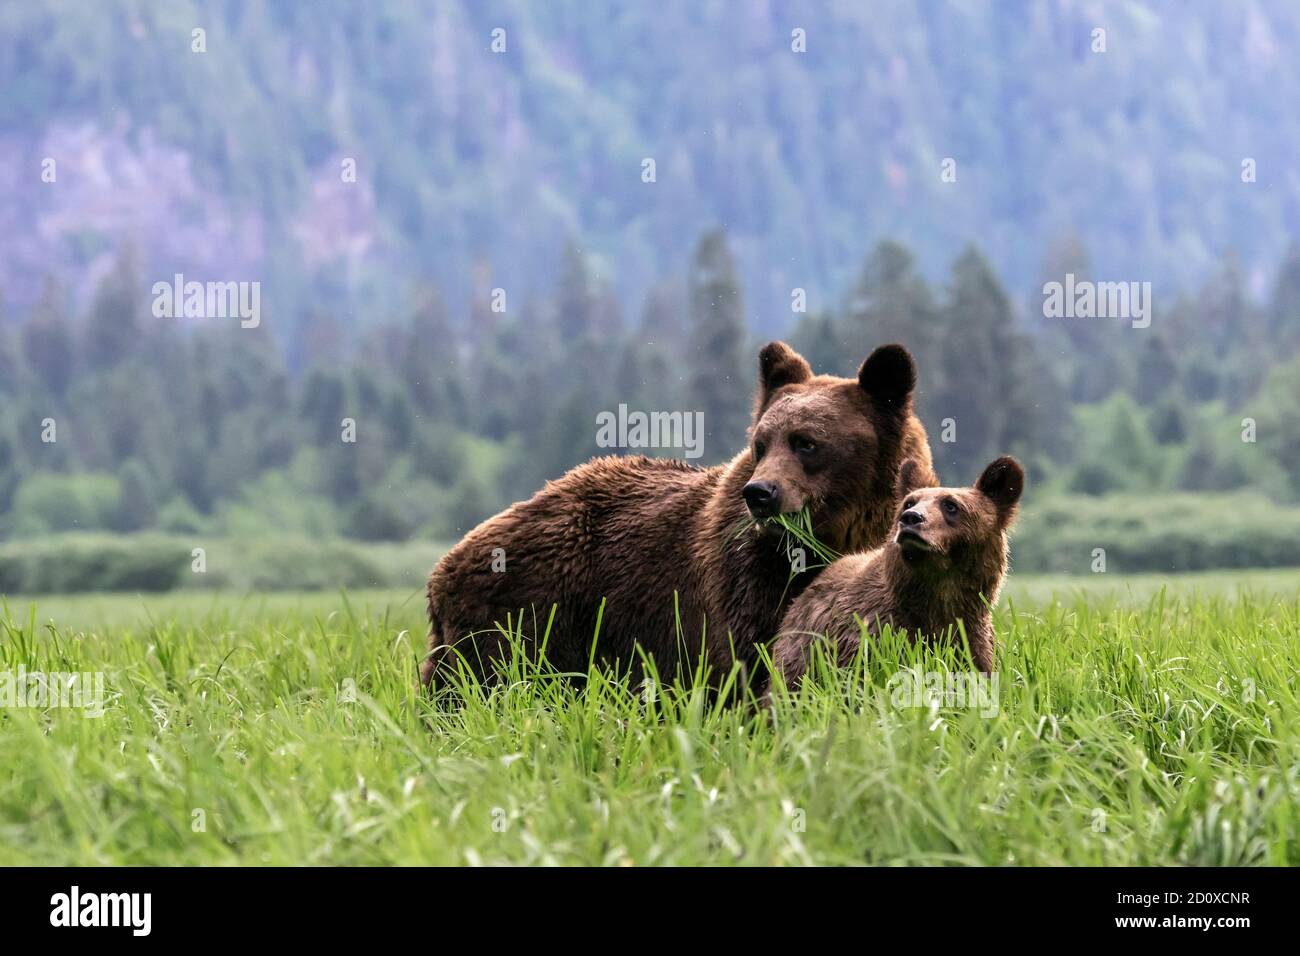 Alert mother and cub in a sedge grass meadow, Khutzeymateen, BC Stock Photo